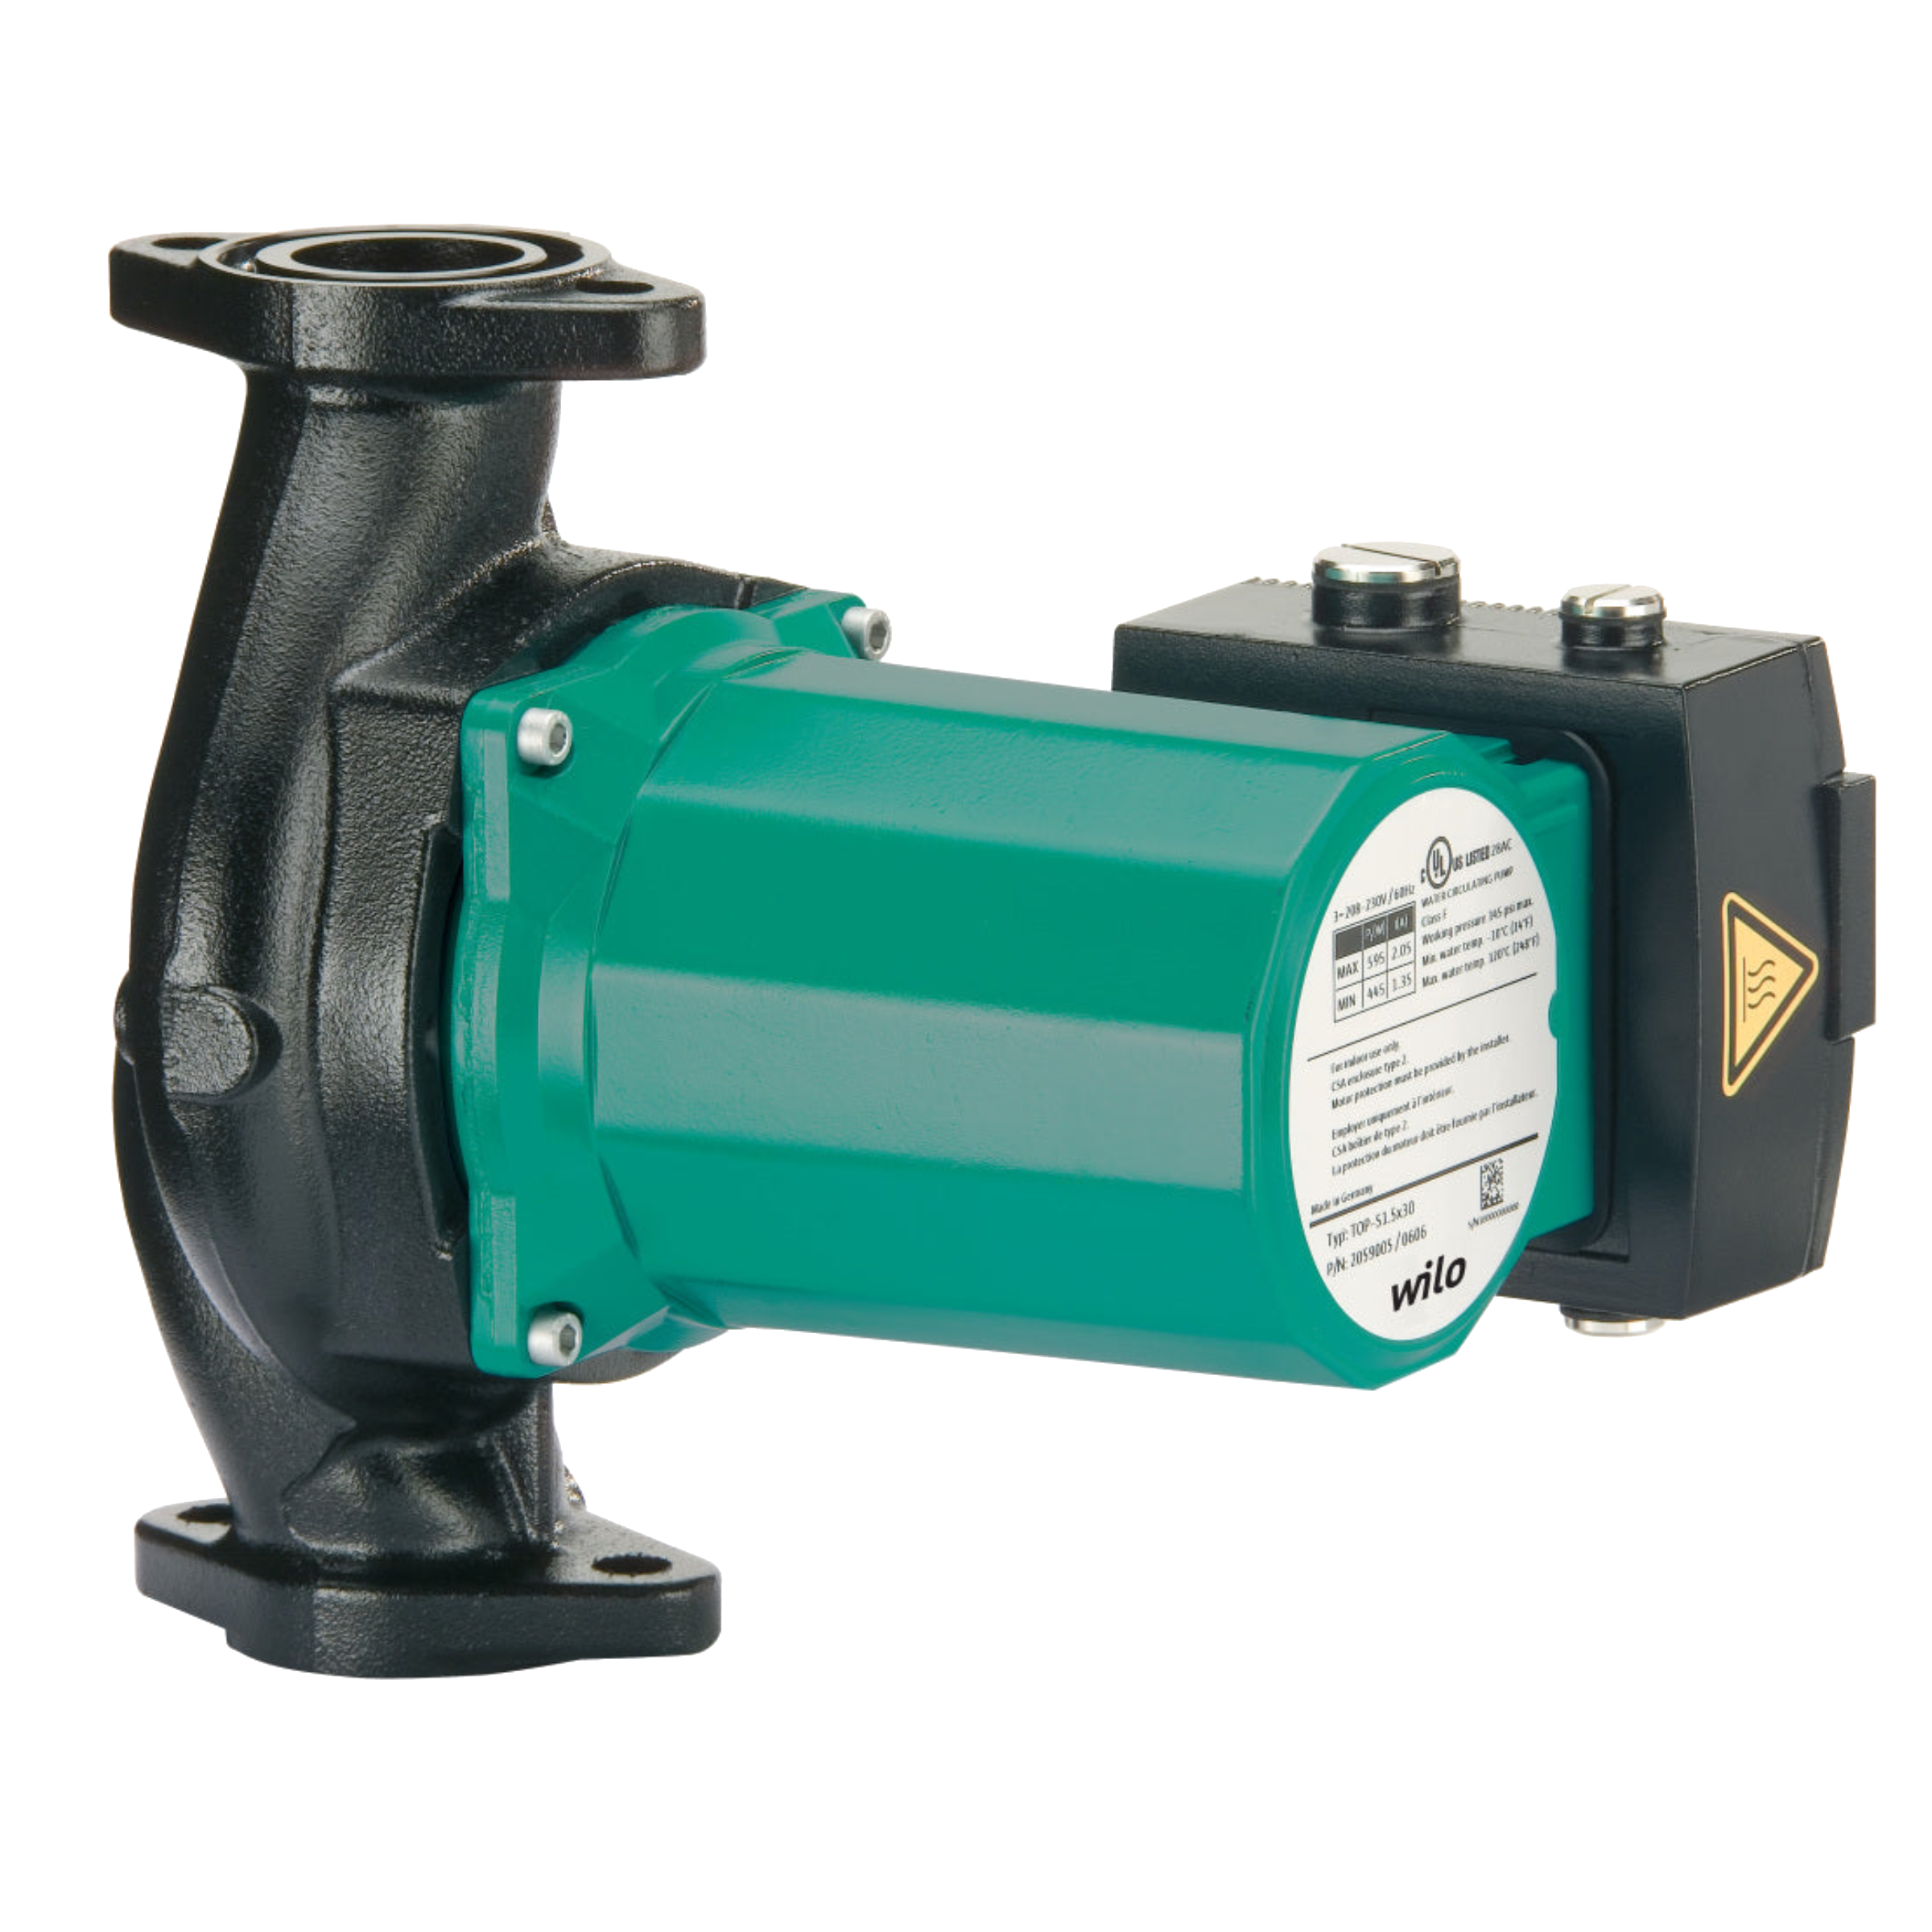 Top S 1.25x35 Wilo Top S Series 2-Speed Residential Circulating Pump, 1/4 HP, Max Flow 48 USGPM, 145 psi, 115V/60Hz/1Ph